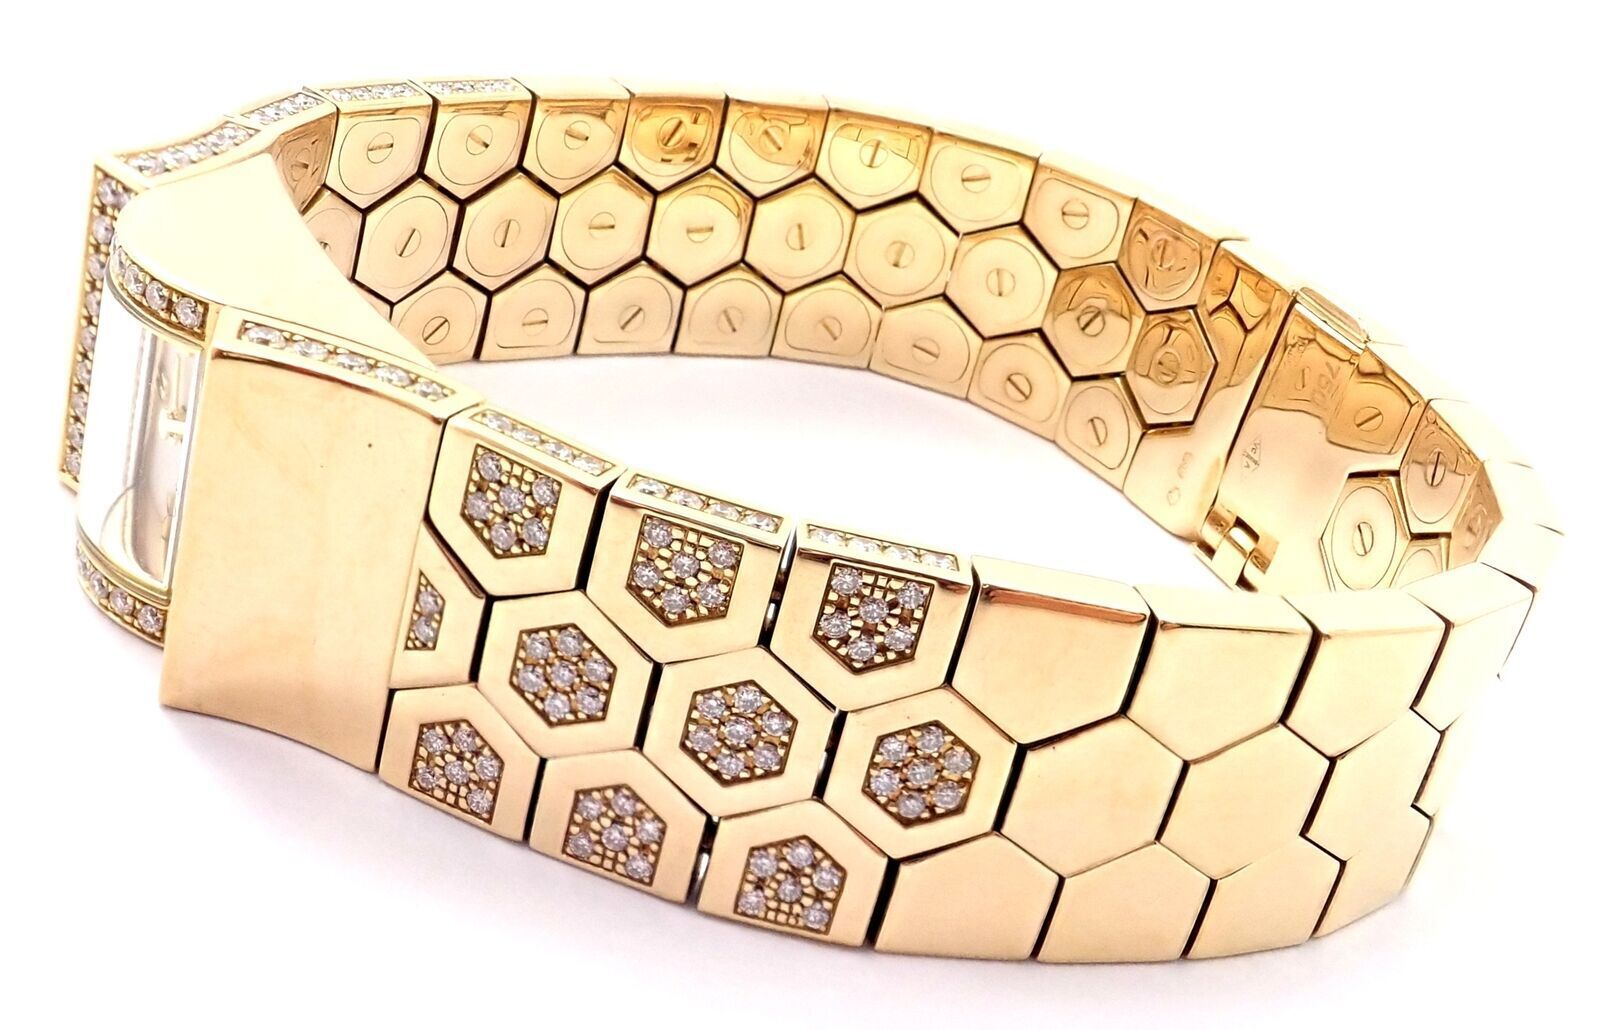 Van Cleef & Arpels Jewelry & Watches:Watches, Parts & Accessories:Watches:Wristwatches Authentic! Van Cleef & Arpels Ludo Swann 18k Yellow Gold Diamond Watch Papers